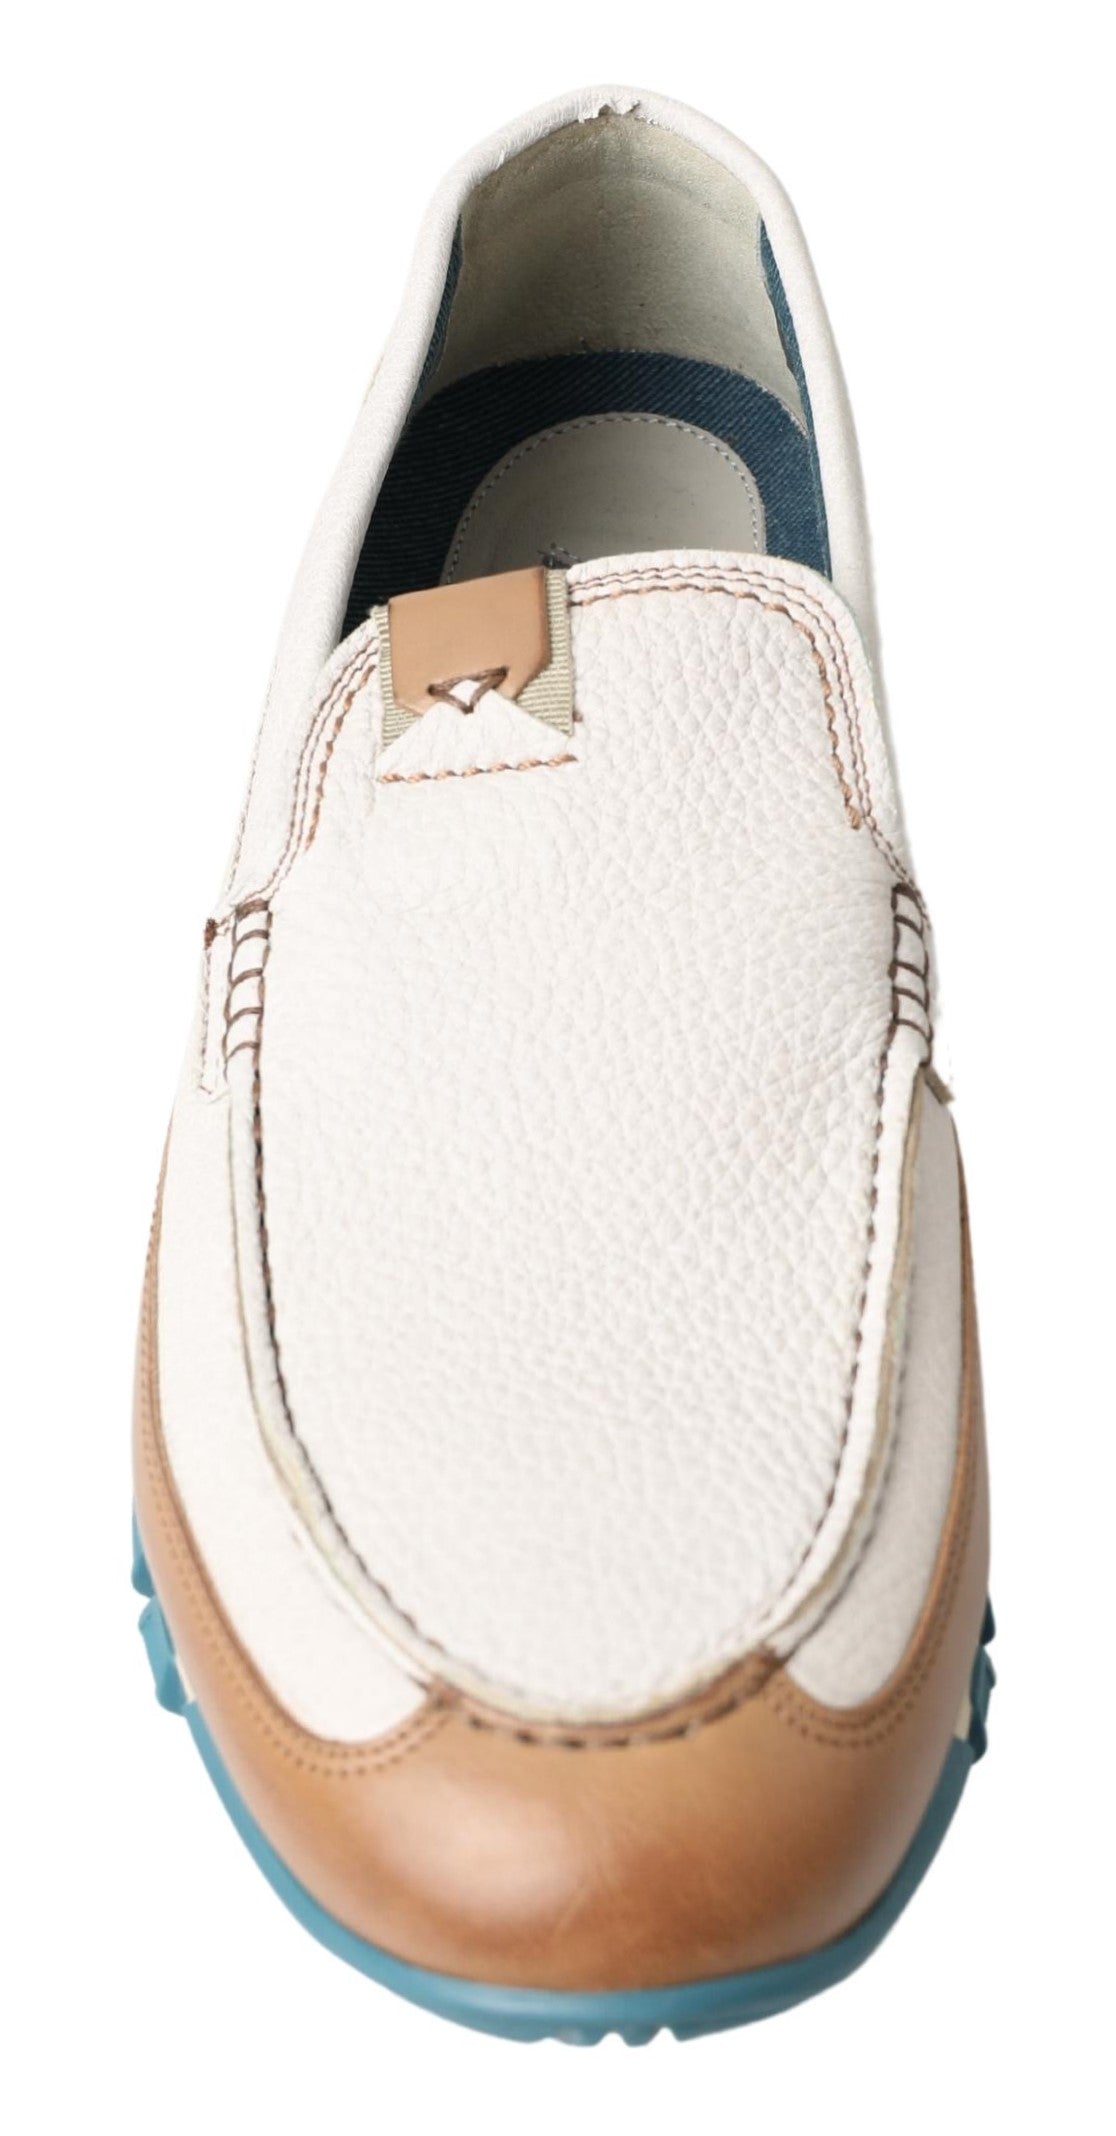 Dolce & Gabbana White Leather Loafers Moccasins Shoes